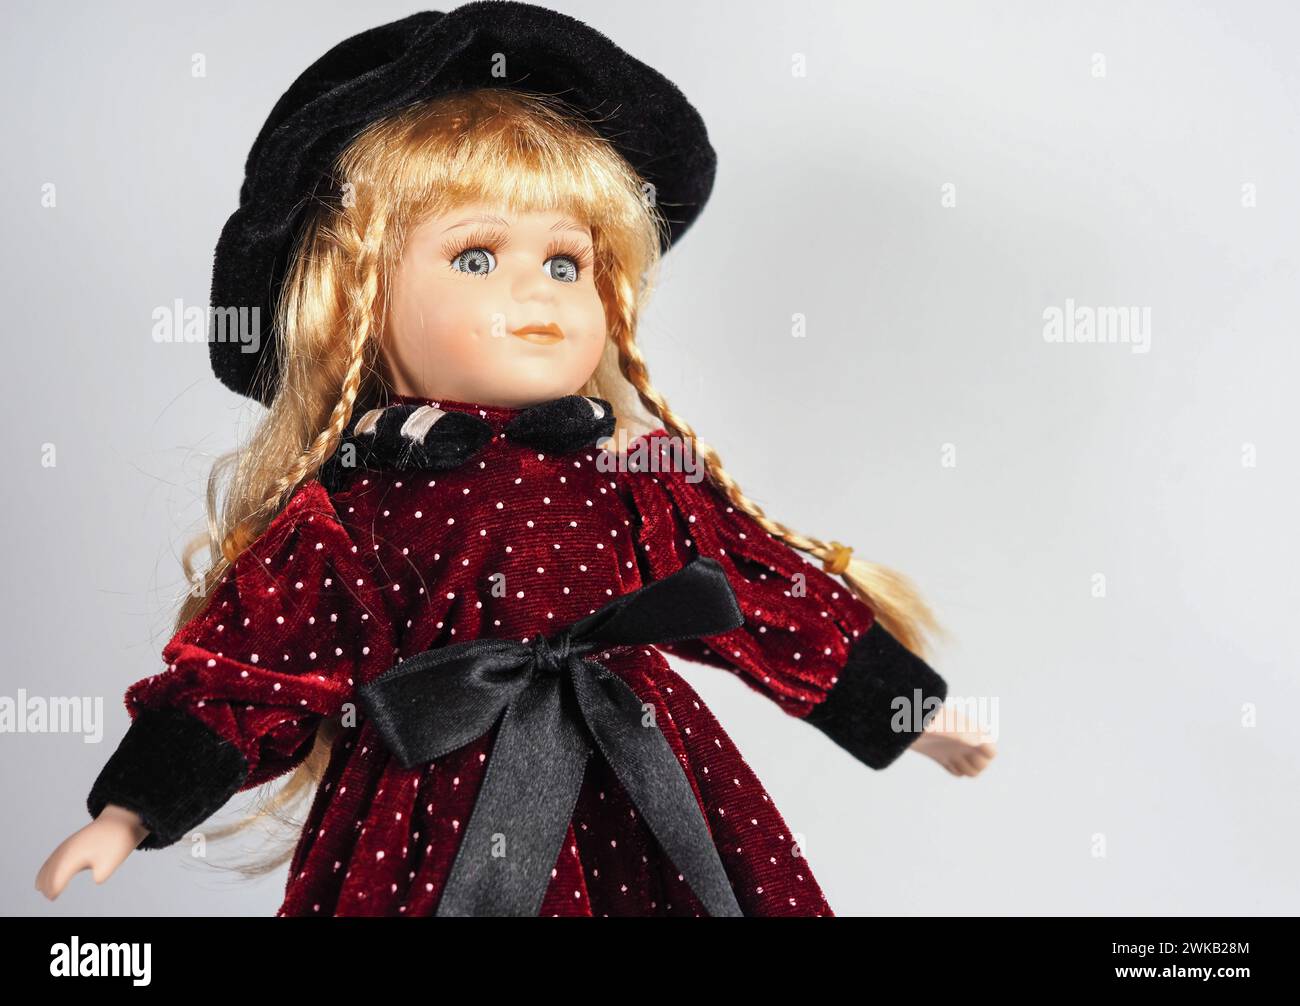 Vintage Austrian porcelain doll girl with blue eyes, blonde with braids, wearing a dark red velvet dress with white polka dots with a black satin belt Stock Photo